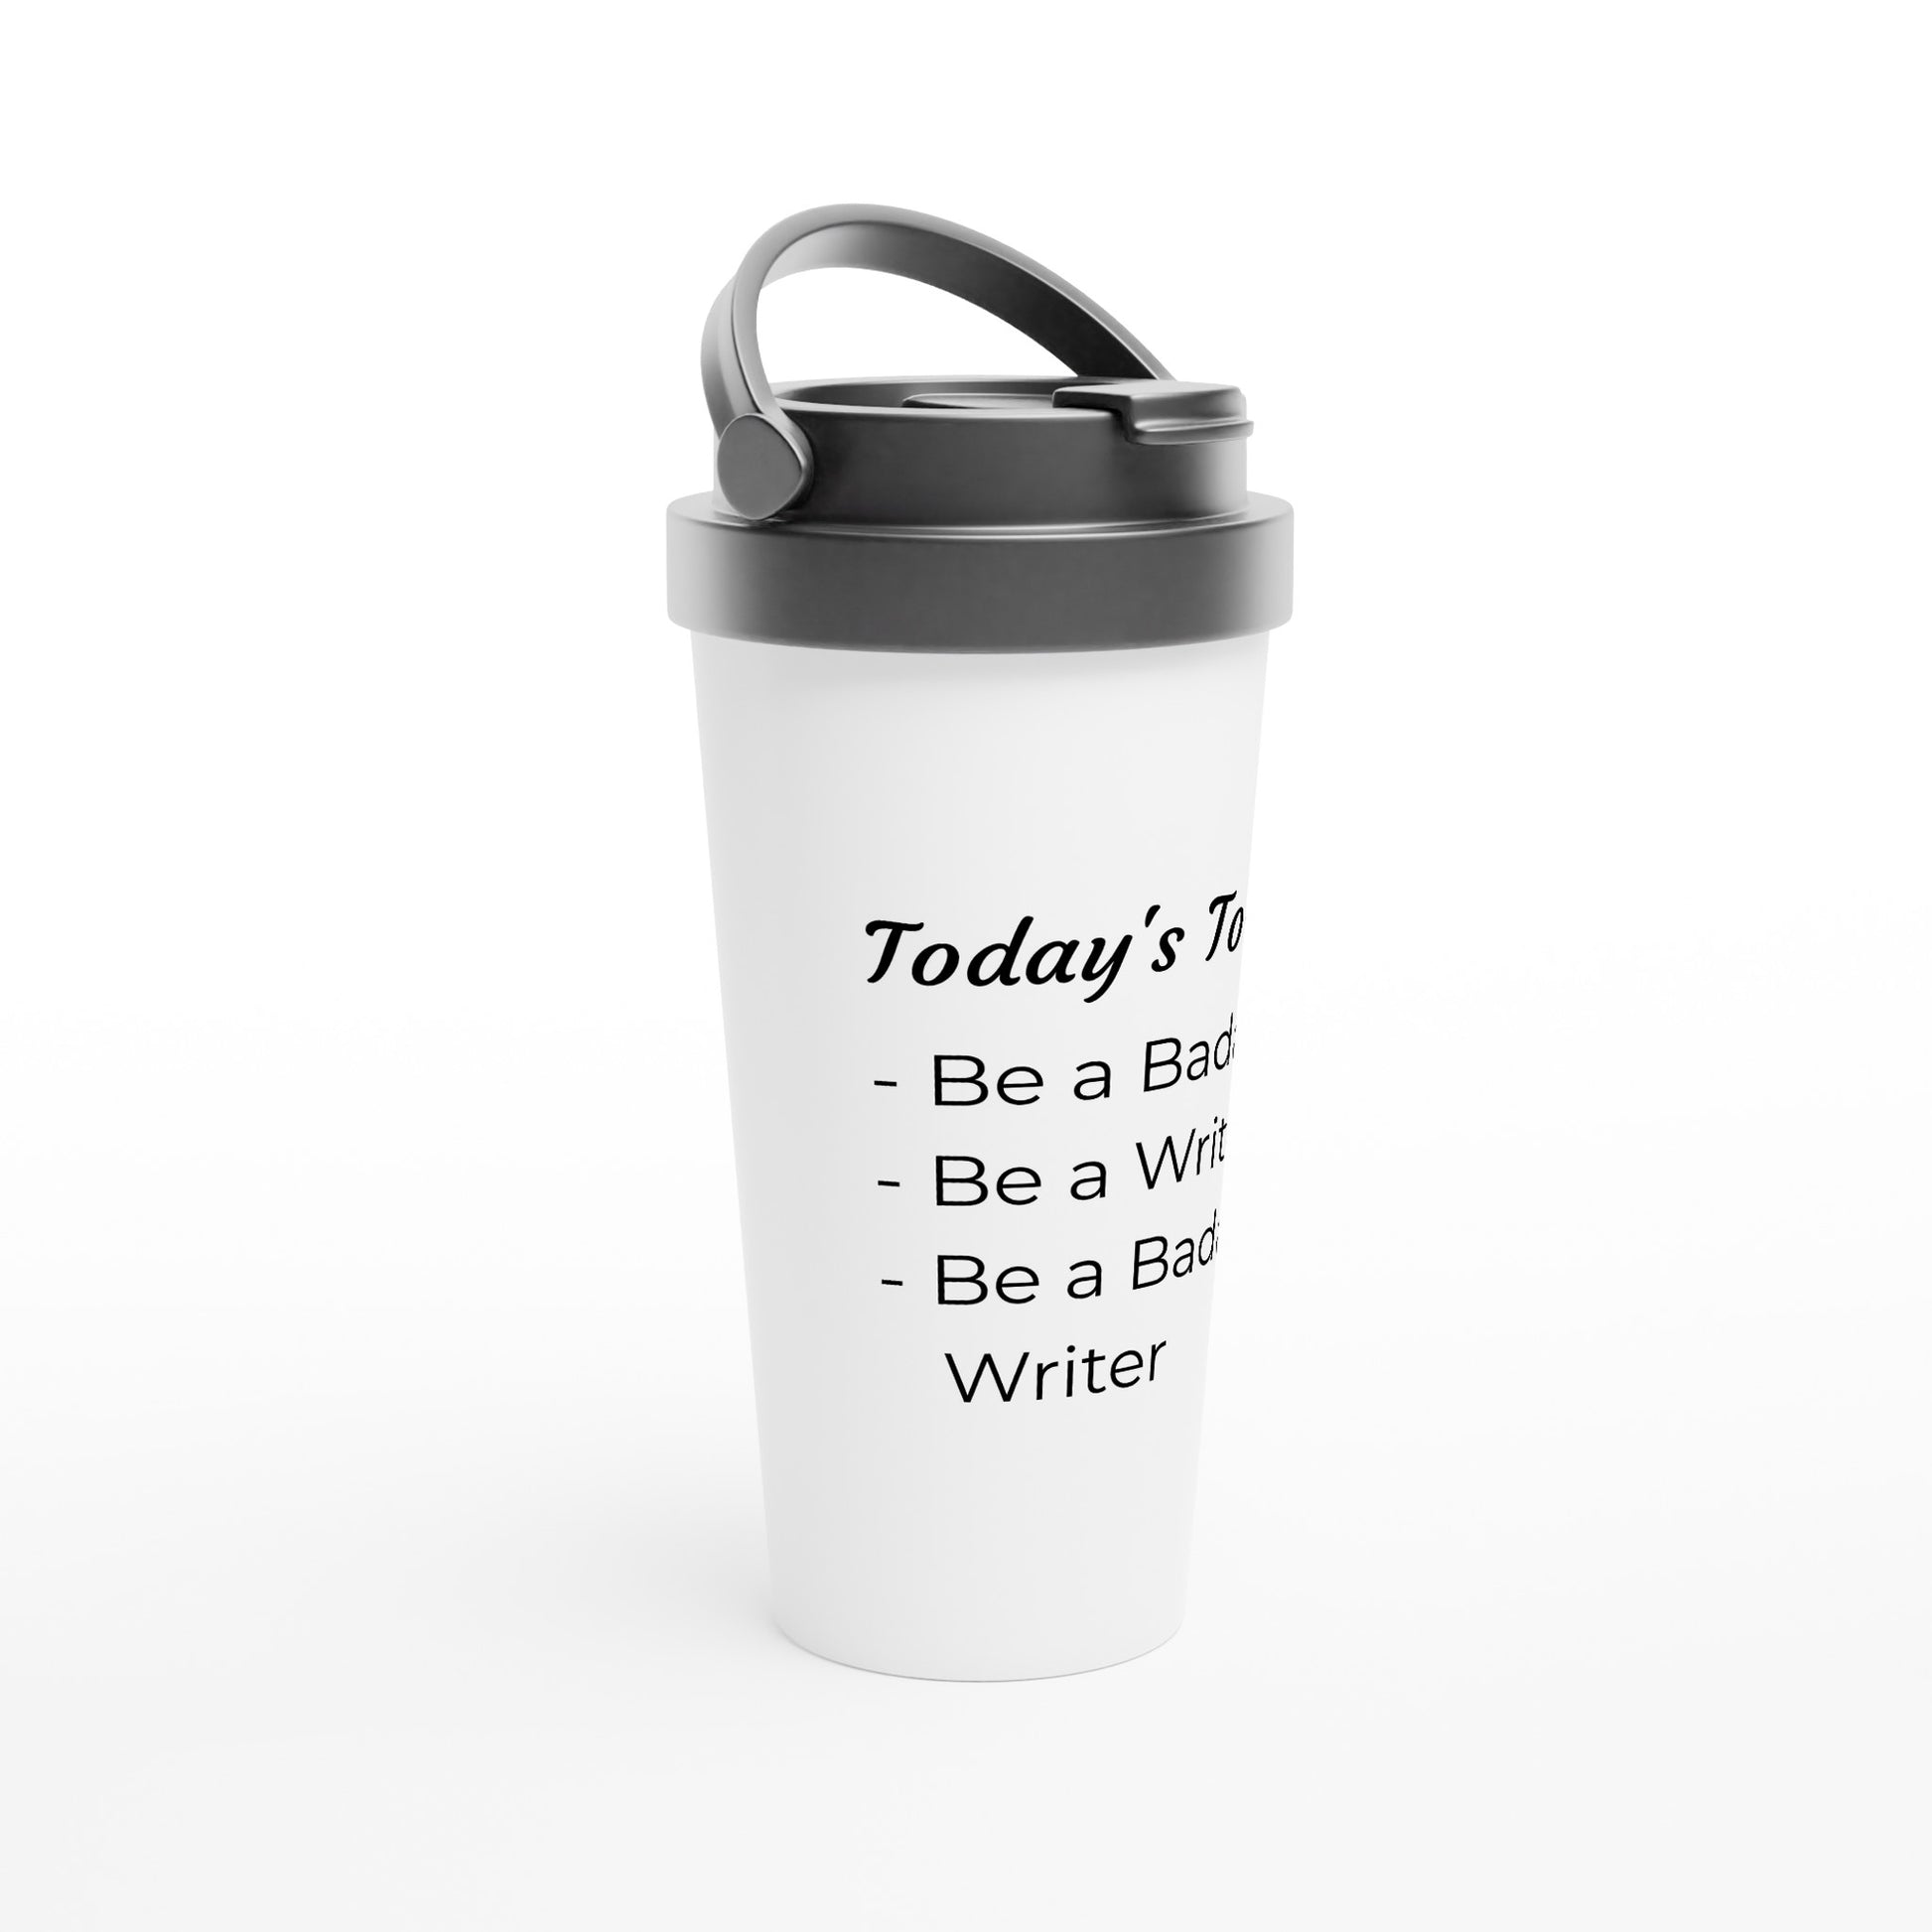 A white Today's To-do // Writing Themed Mug with the words today's day be a bad winter, reflecting the creativity of a determined writer.